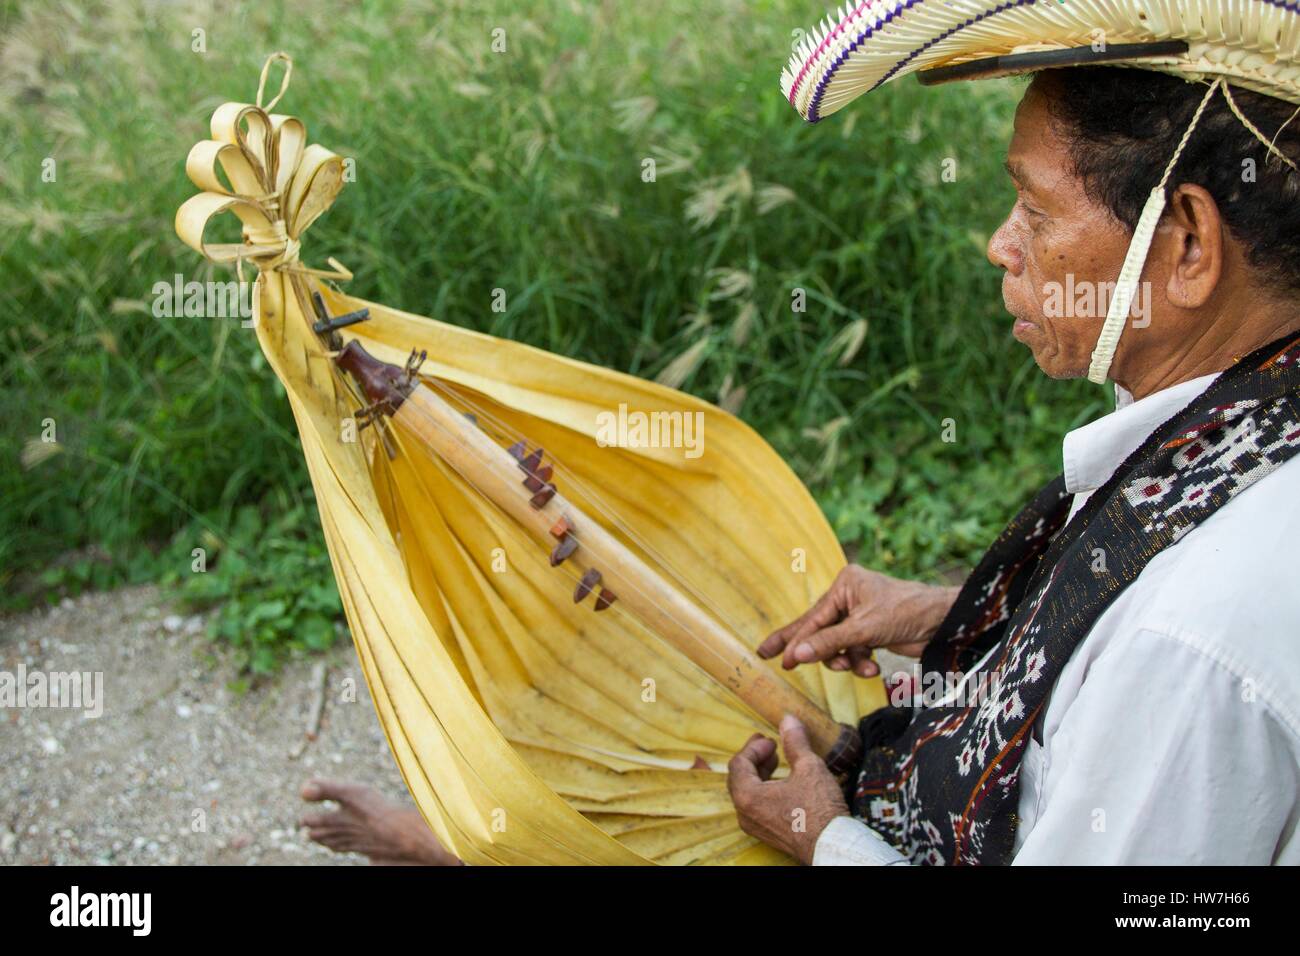 Indonesia, East Nusa Tenggara, West Timor, South Central Timor Regency, Kupang, sasando player, traditional string instrument from Rote island Stock Photo